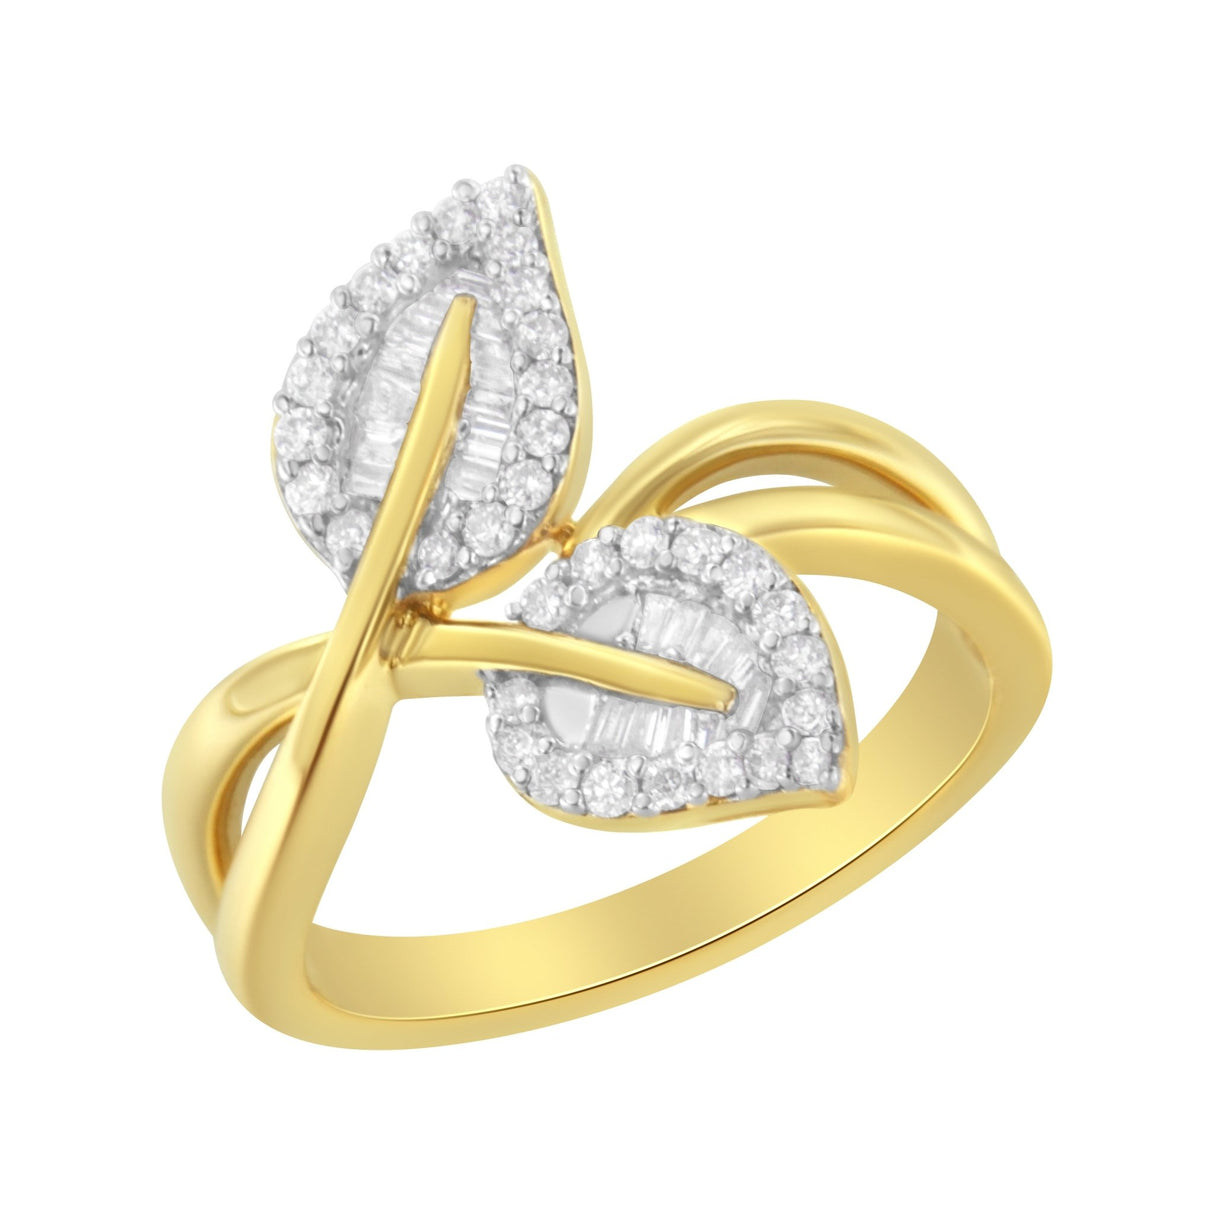 10K Yellow Gold 3/8 Cttw Round And Baguette-Cut Diamond Leaf Cocktail Ring - Size 8 (I-J Color, I1-I2 Clarity) - Tuesday Morning-Rings